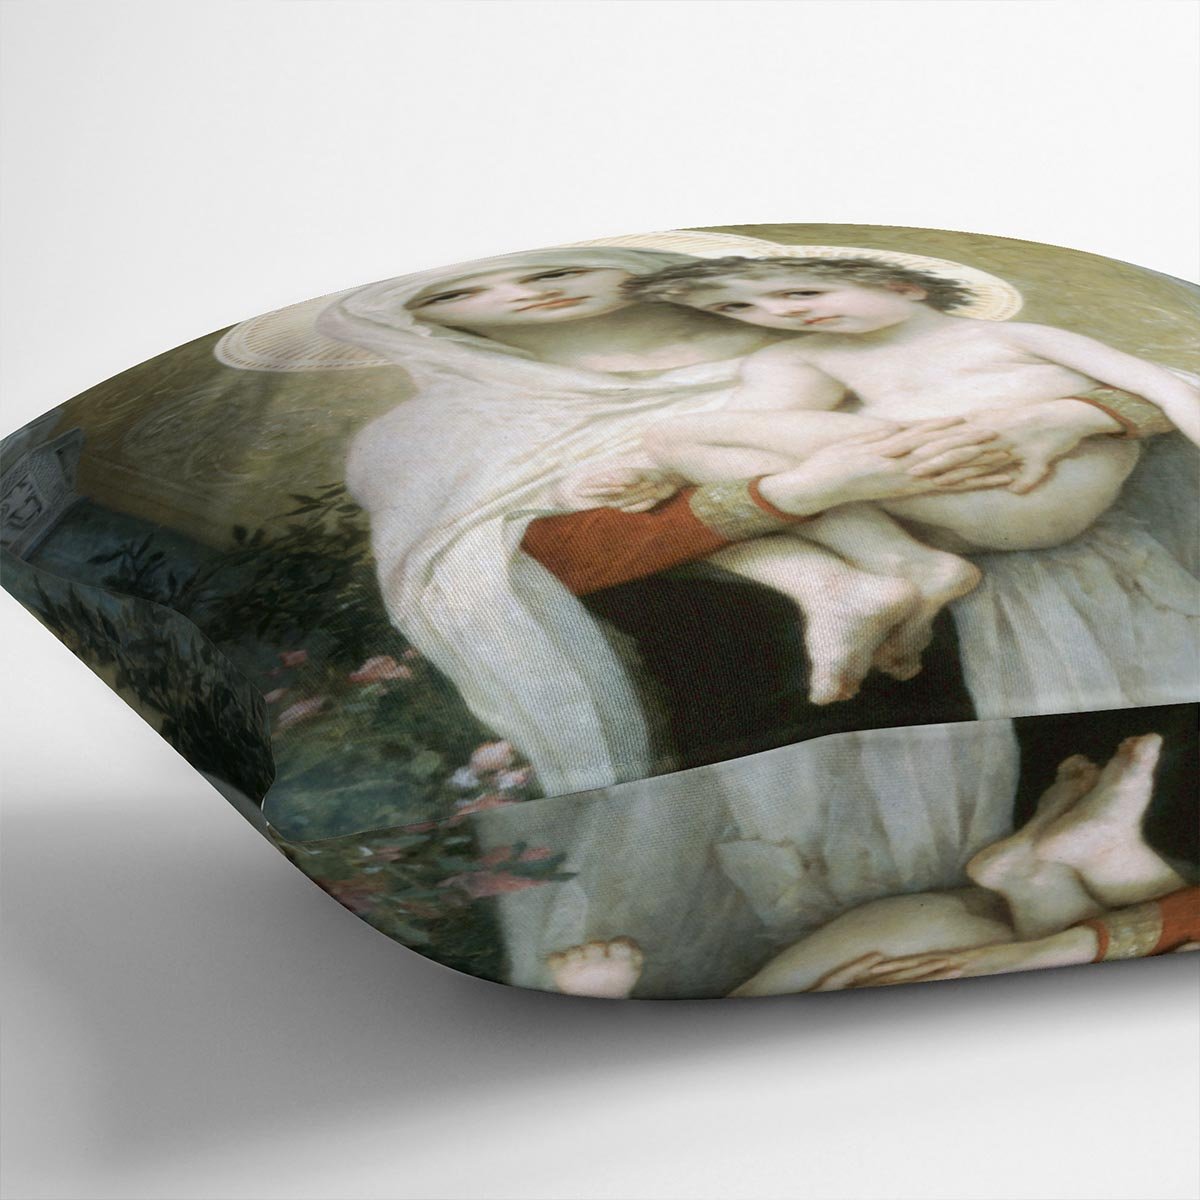 The Madonna of the Roses By Bouguereau Throw Pillow